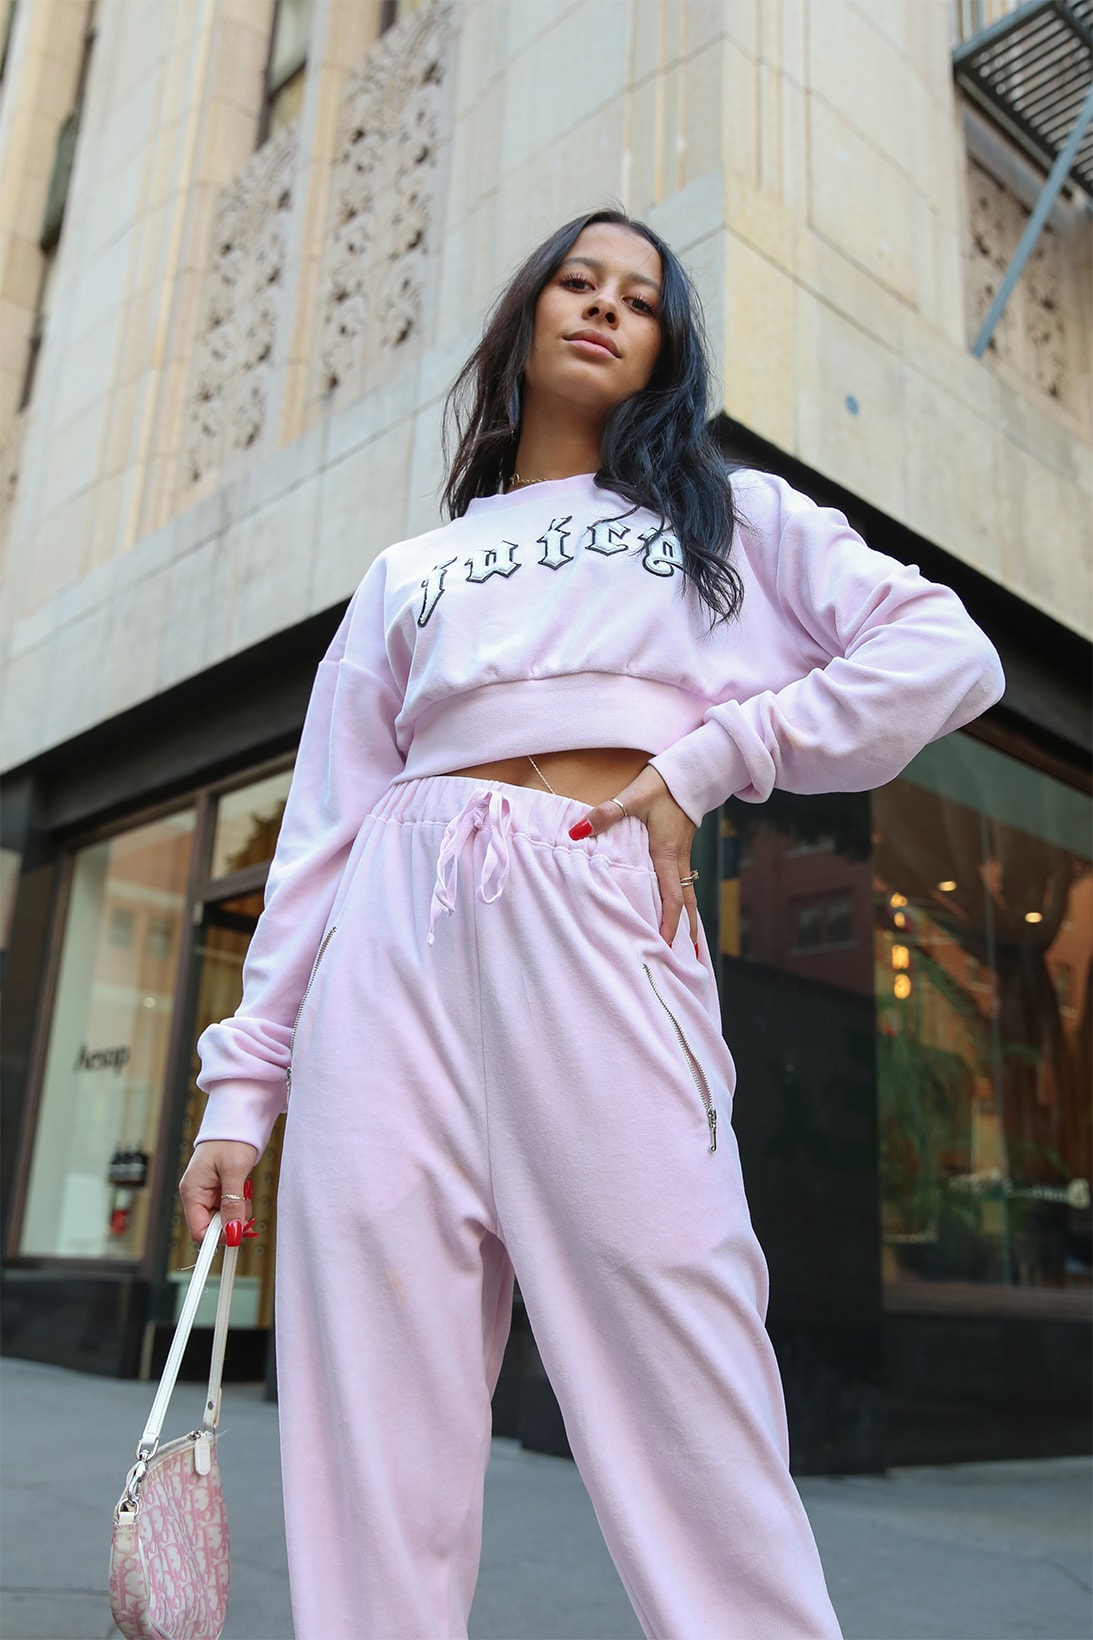 Vfiles Juicy Couture Collection Sami Miro collaboration velour tracksuit bomber jacket t-shirt track pants